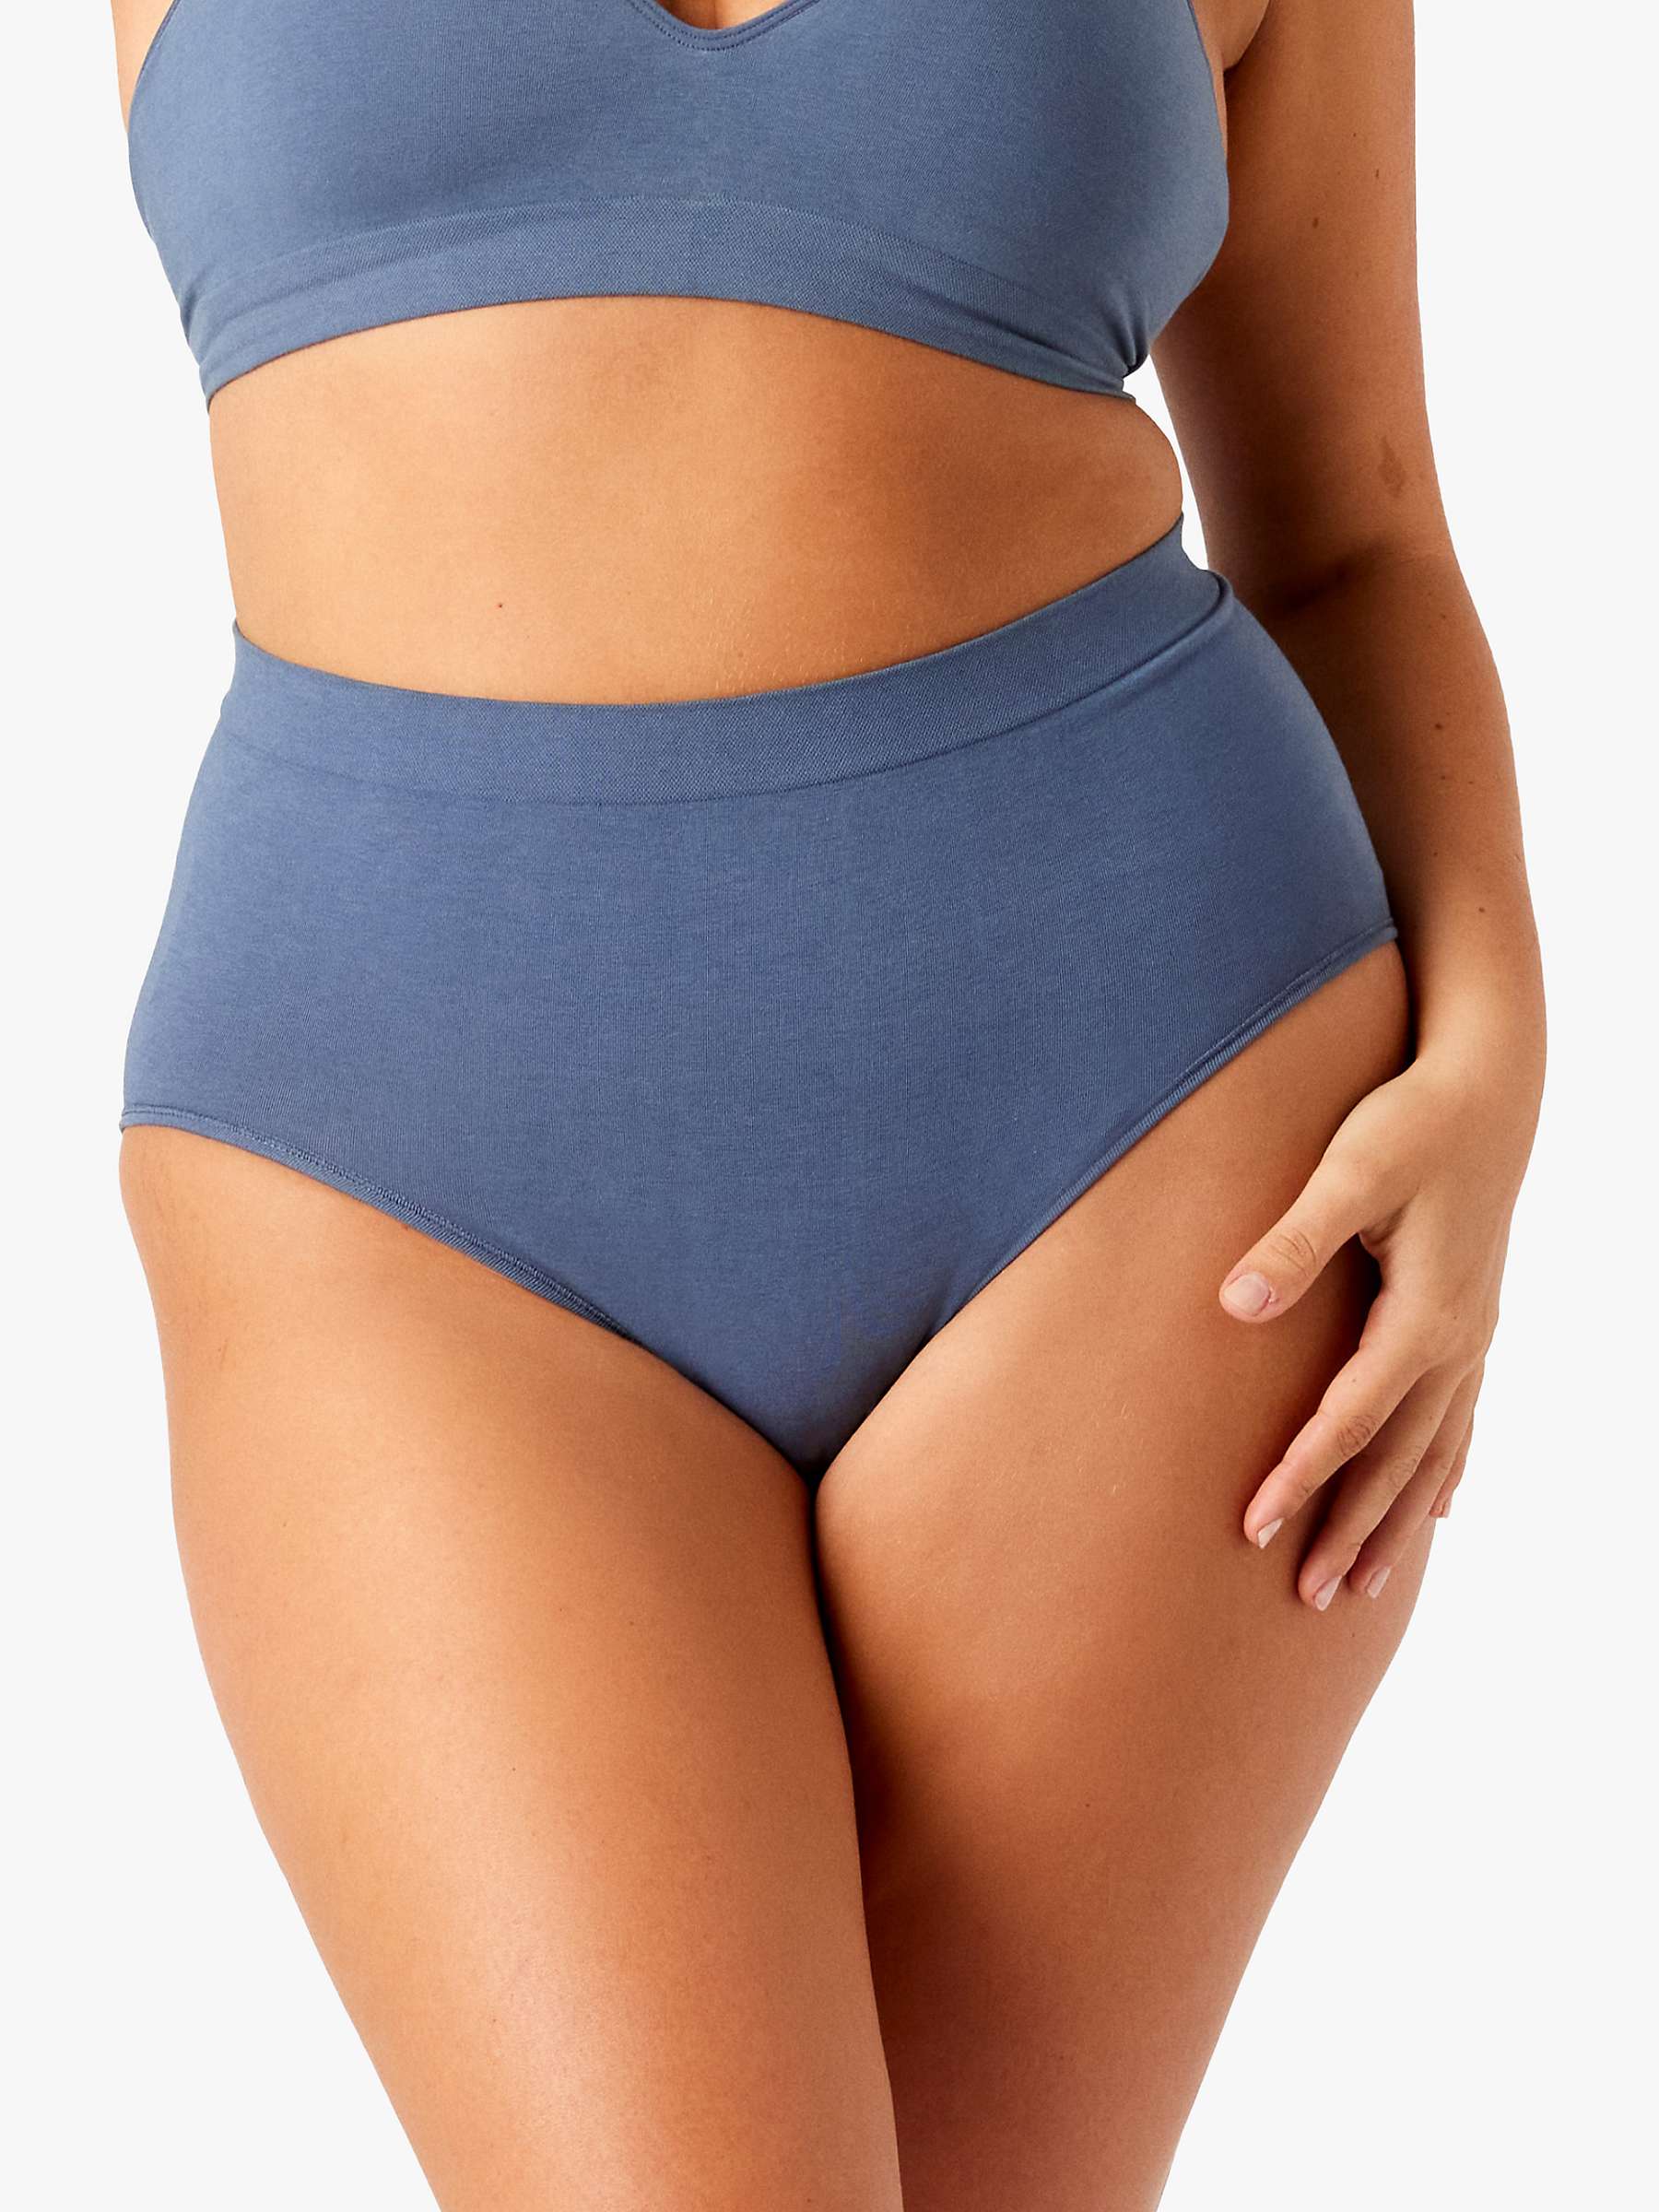 Ambra Organic Cotton Full Brief Knickers, Slate at John Lewis & Partners